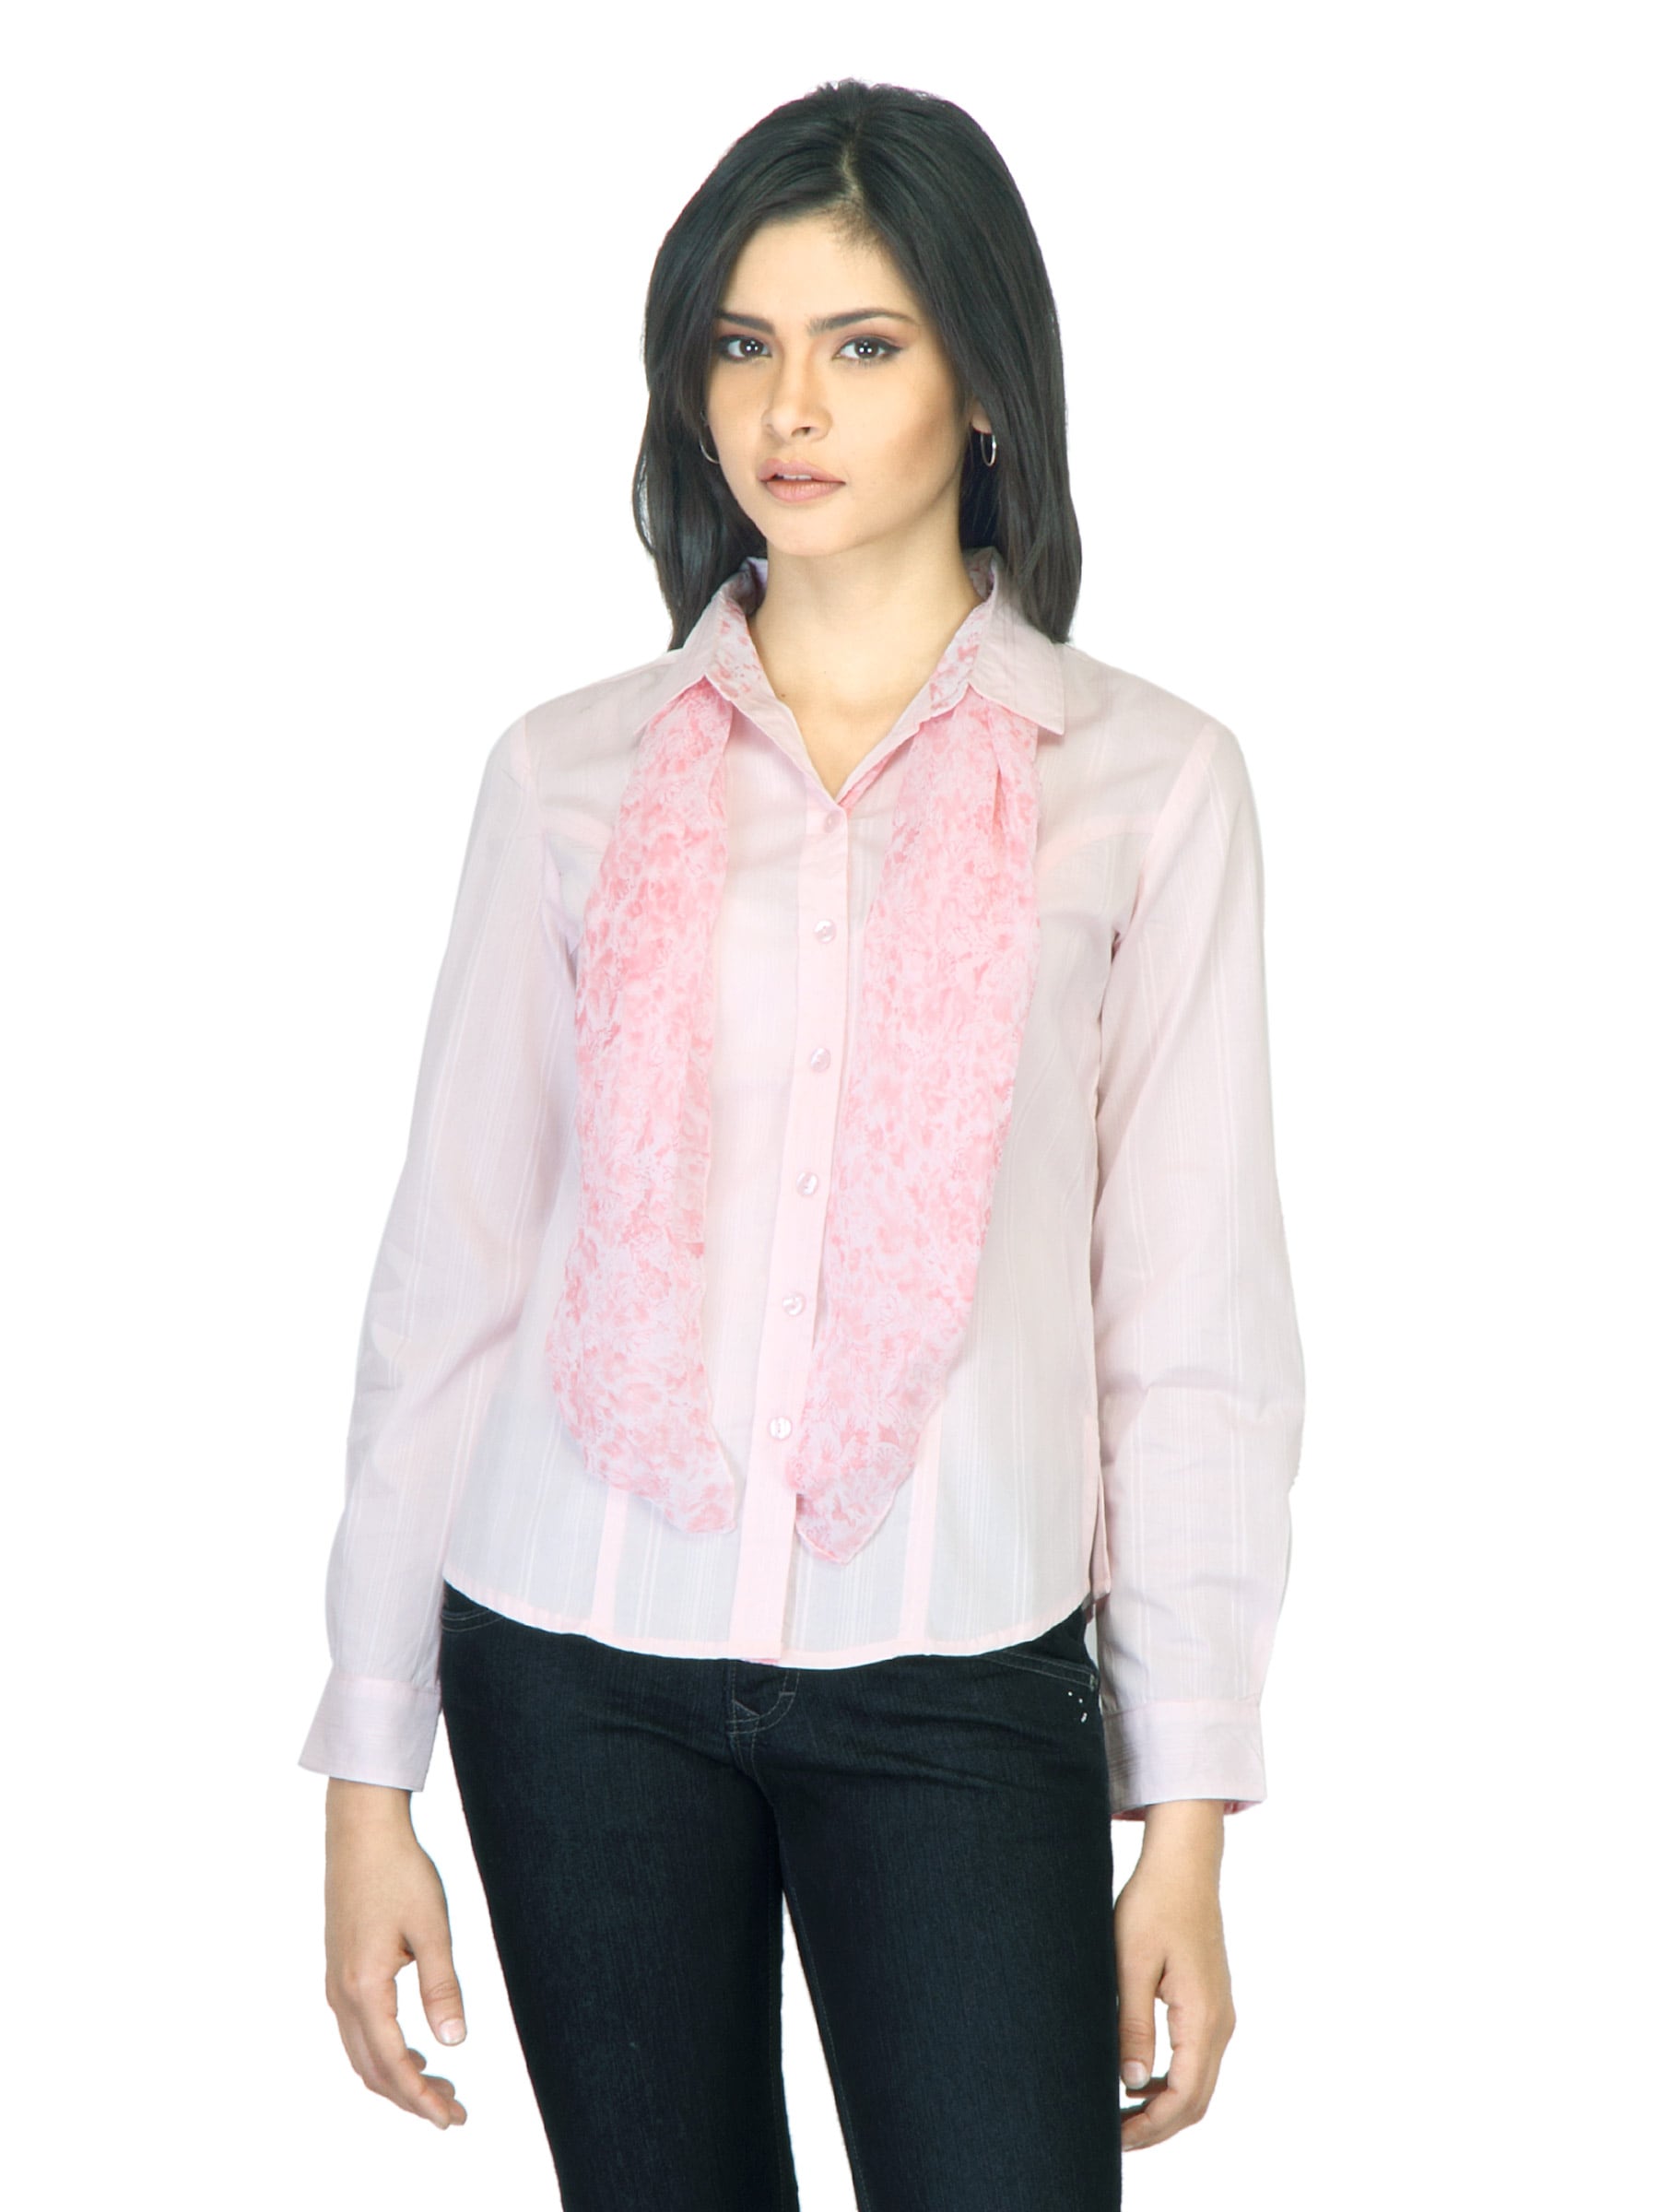 Scullers For Her Striped Pink Shirt